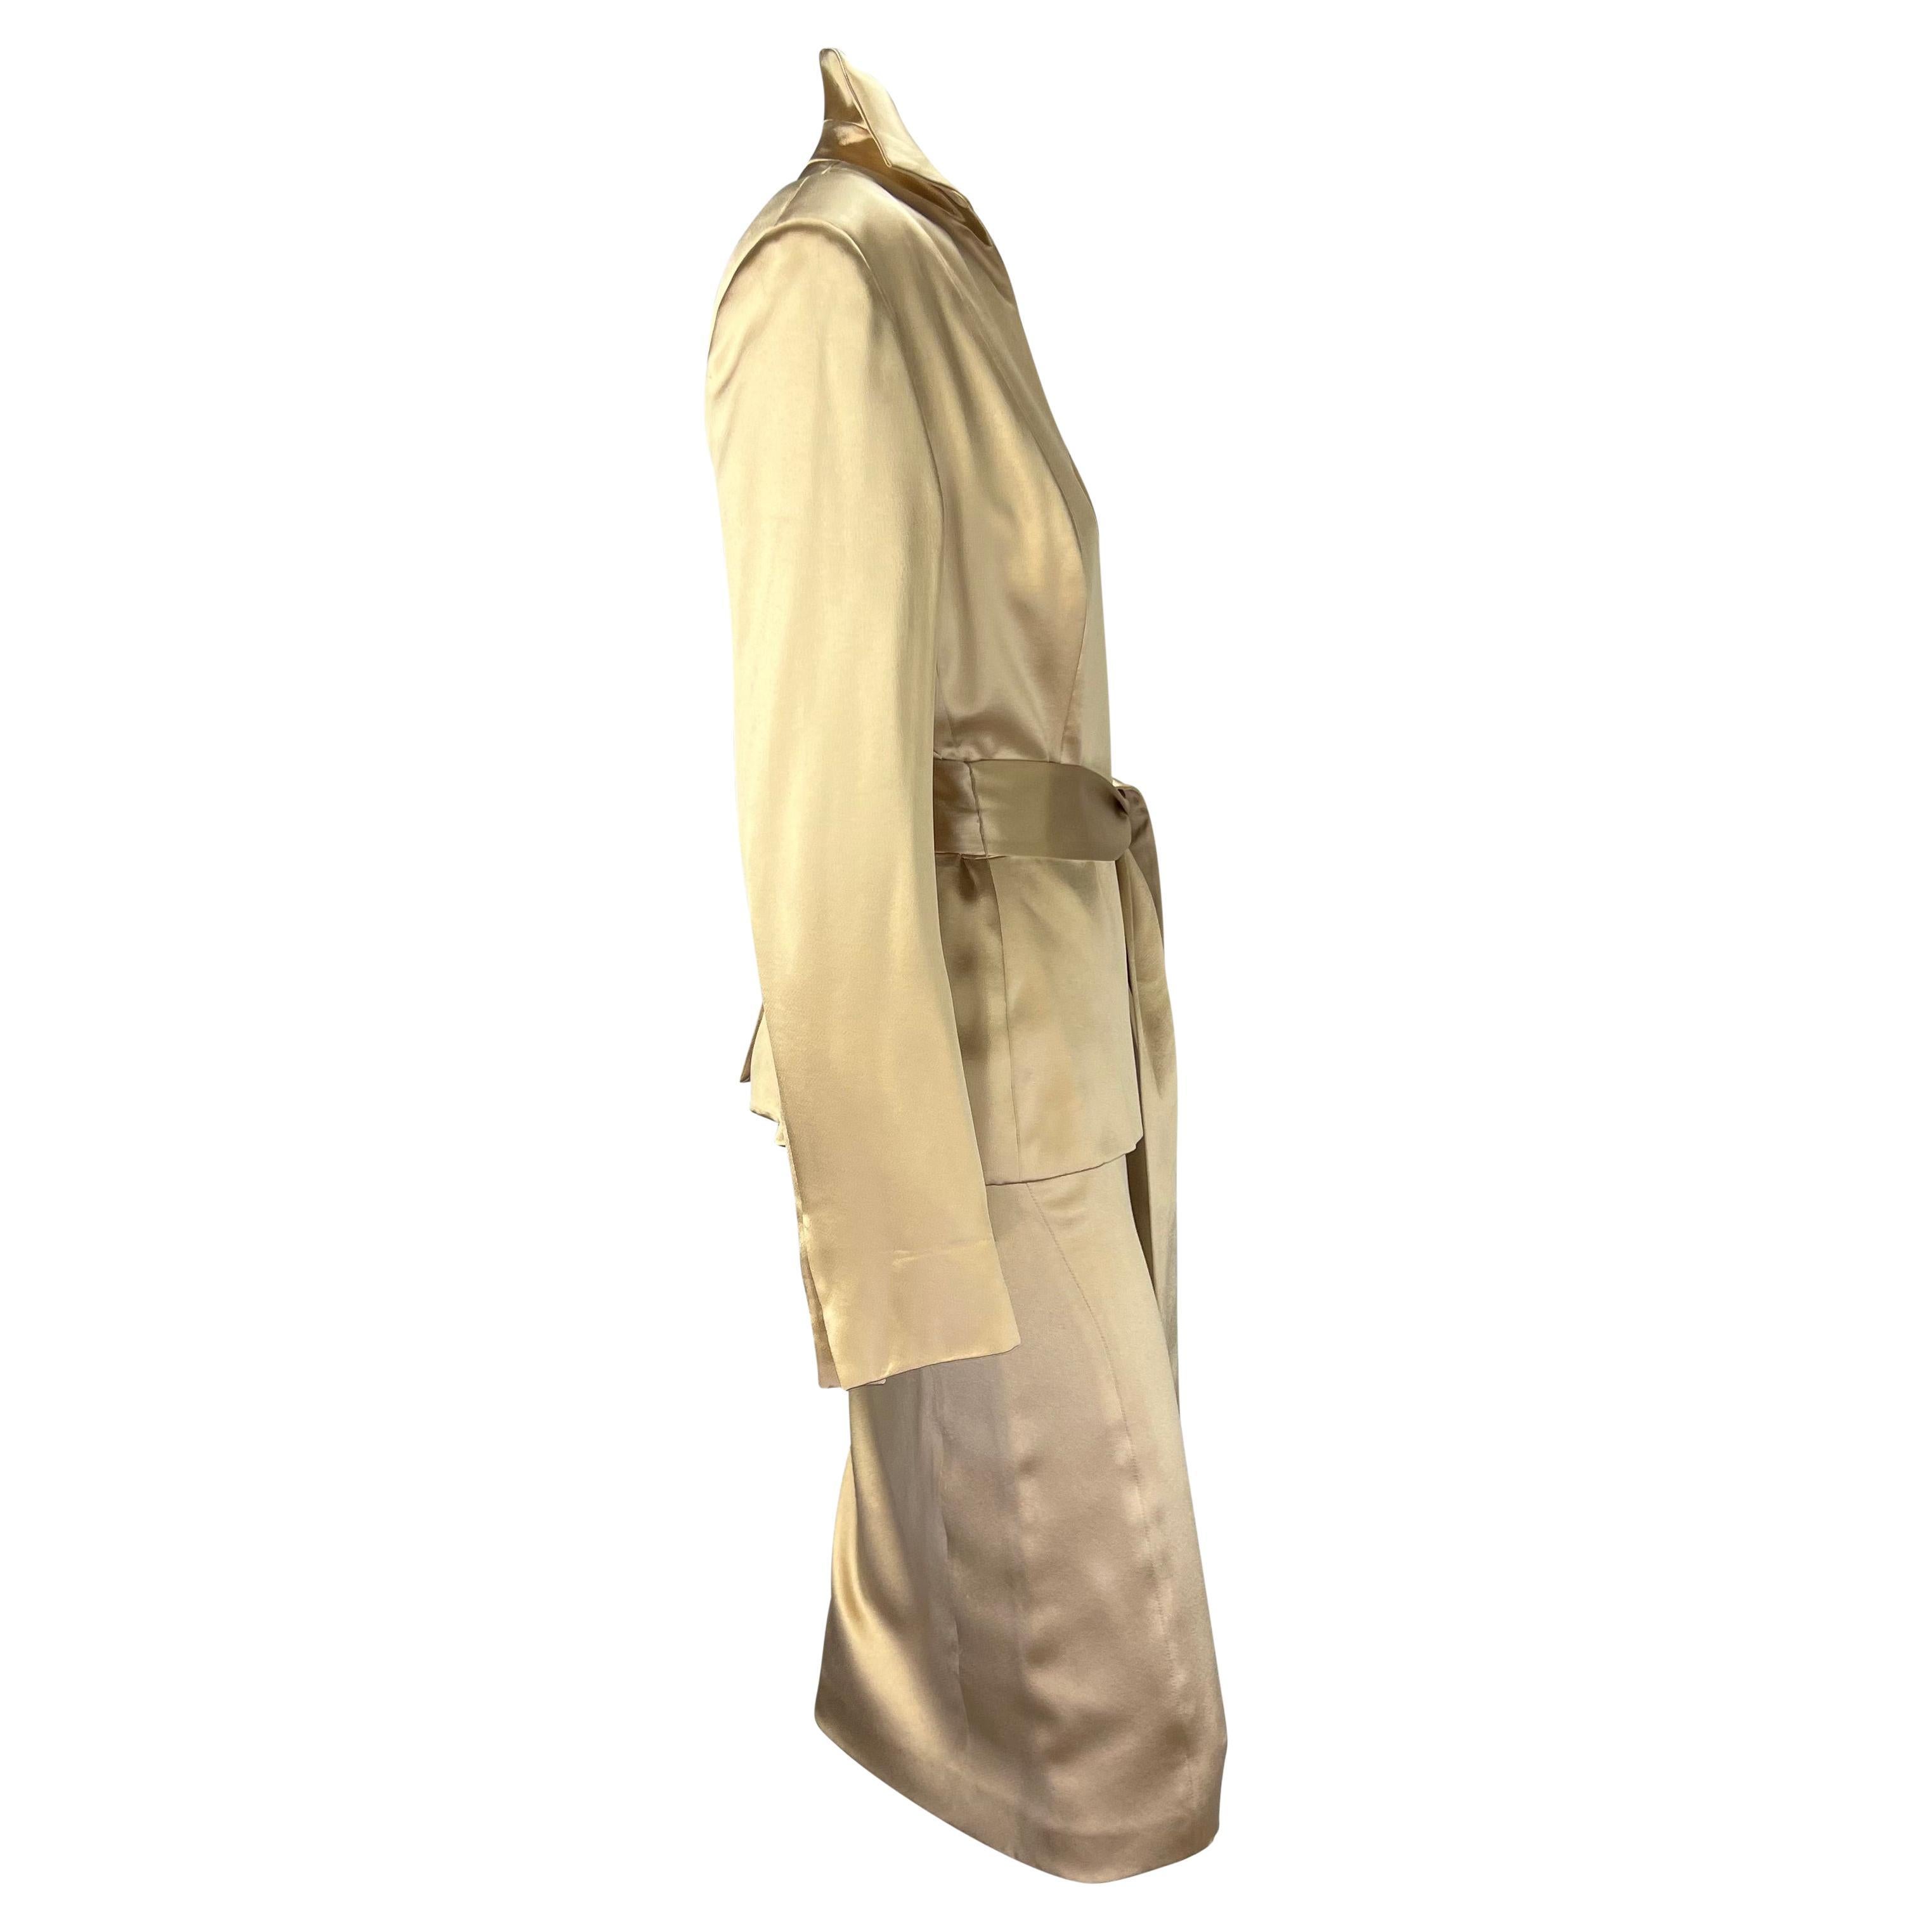 Beige S/S 2001 Gucci by Tom Ford Champagne Silk Satin Sash Belt Sample Skirt Suit